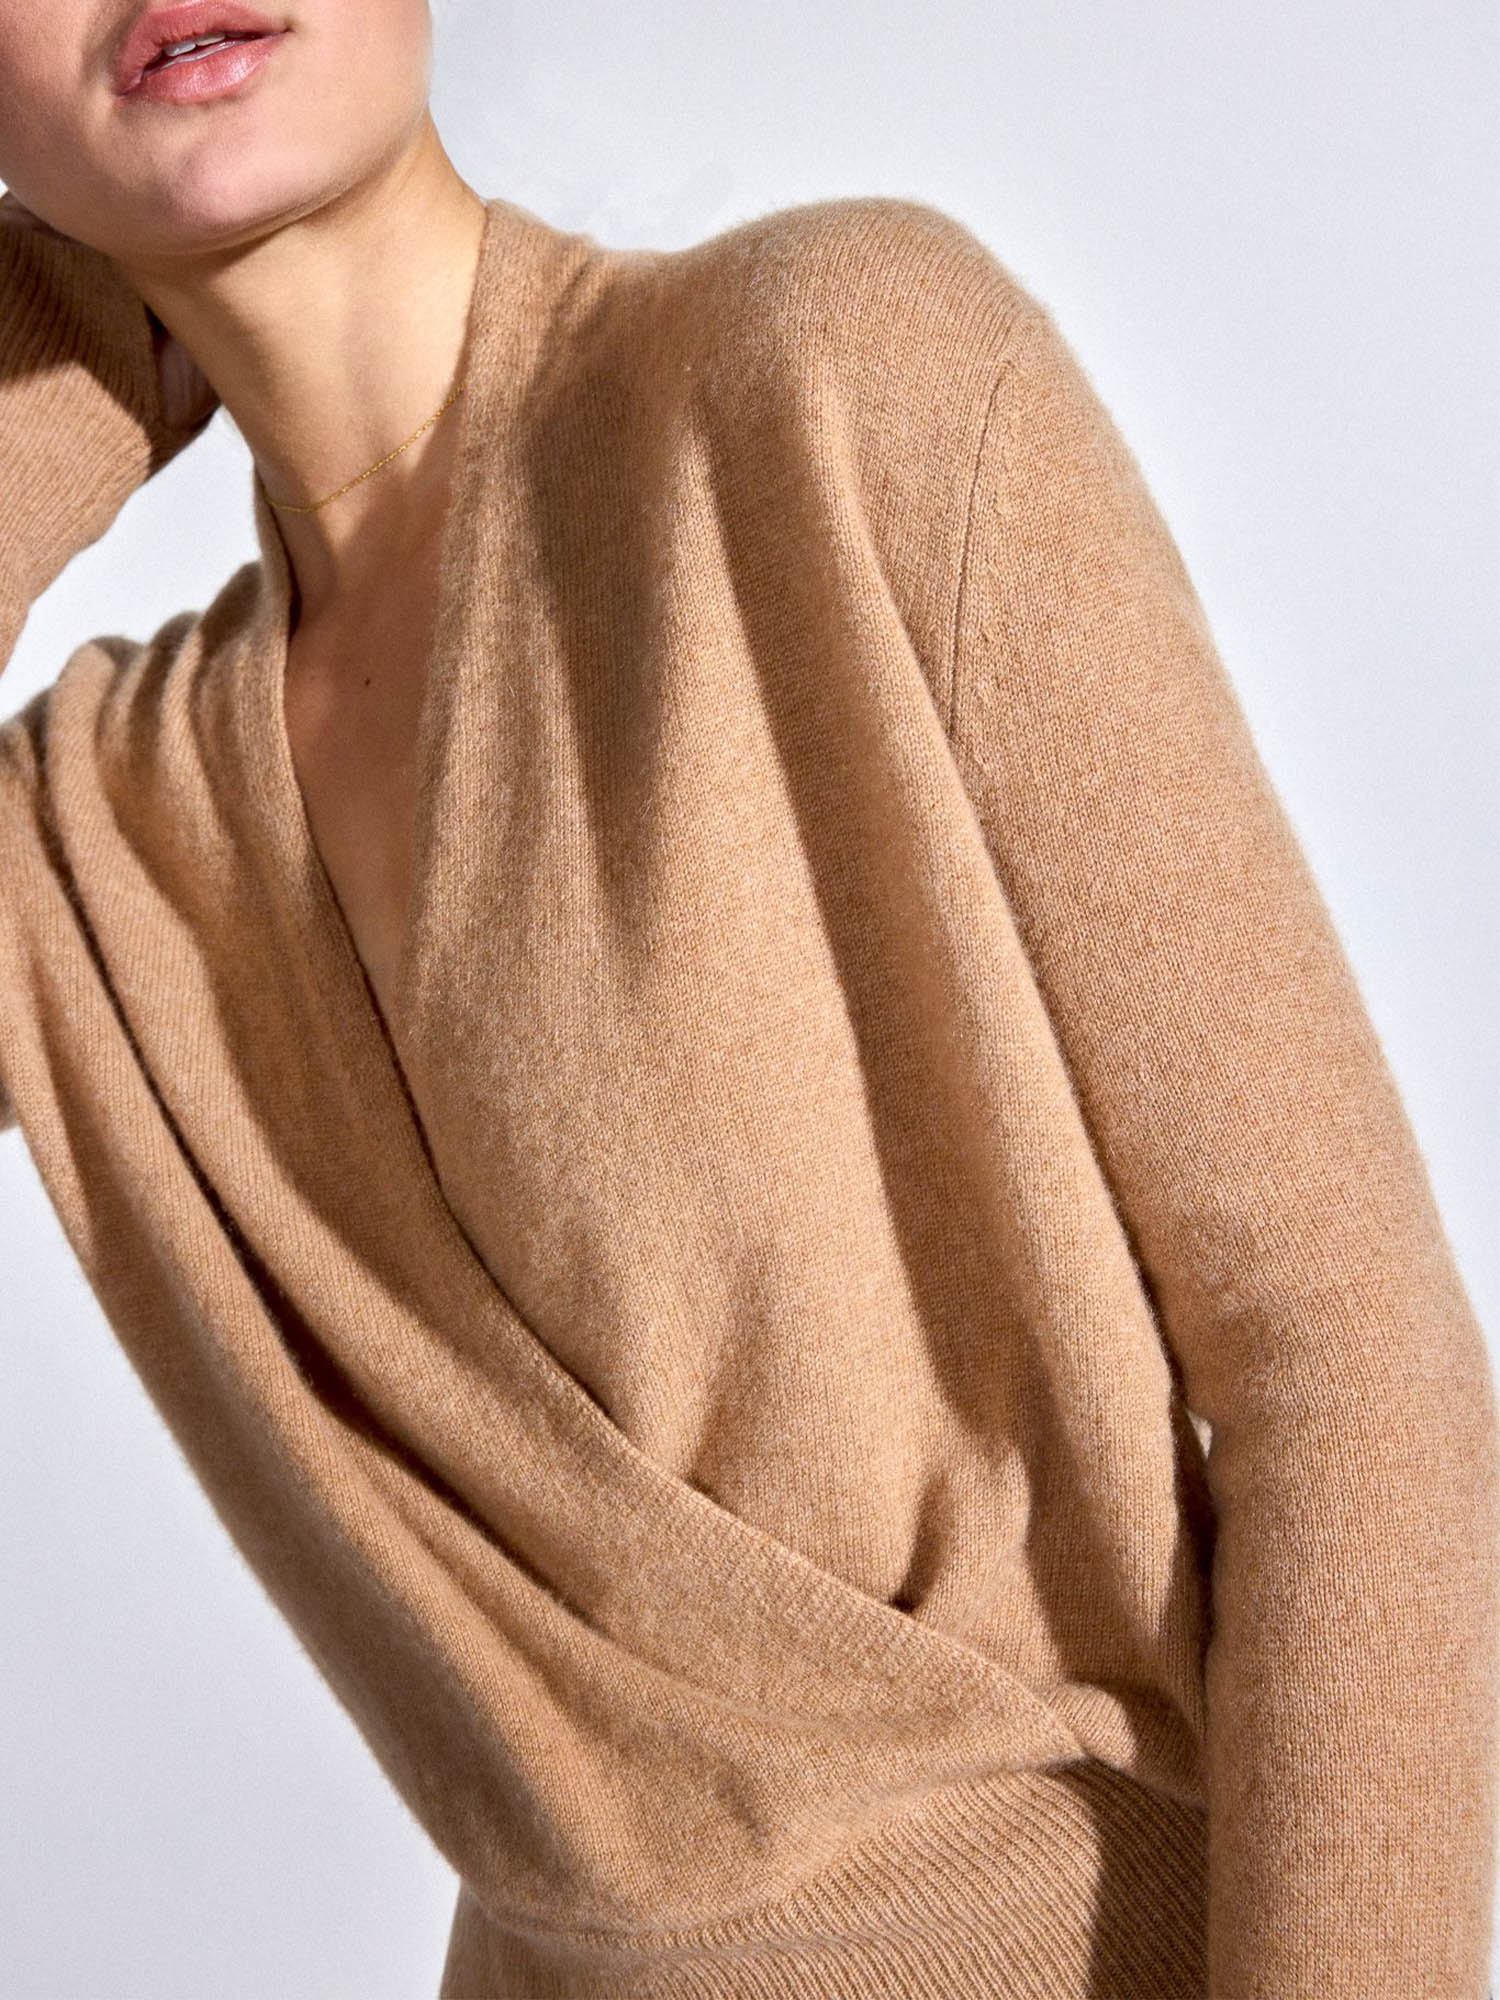 Phinneas cashmere v-neck blue tan sweater side view